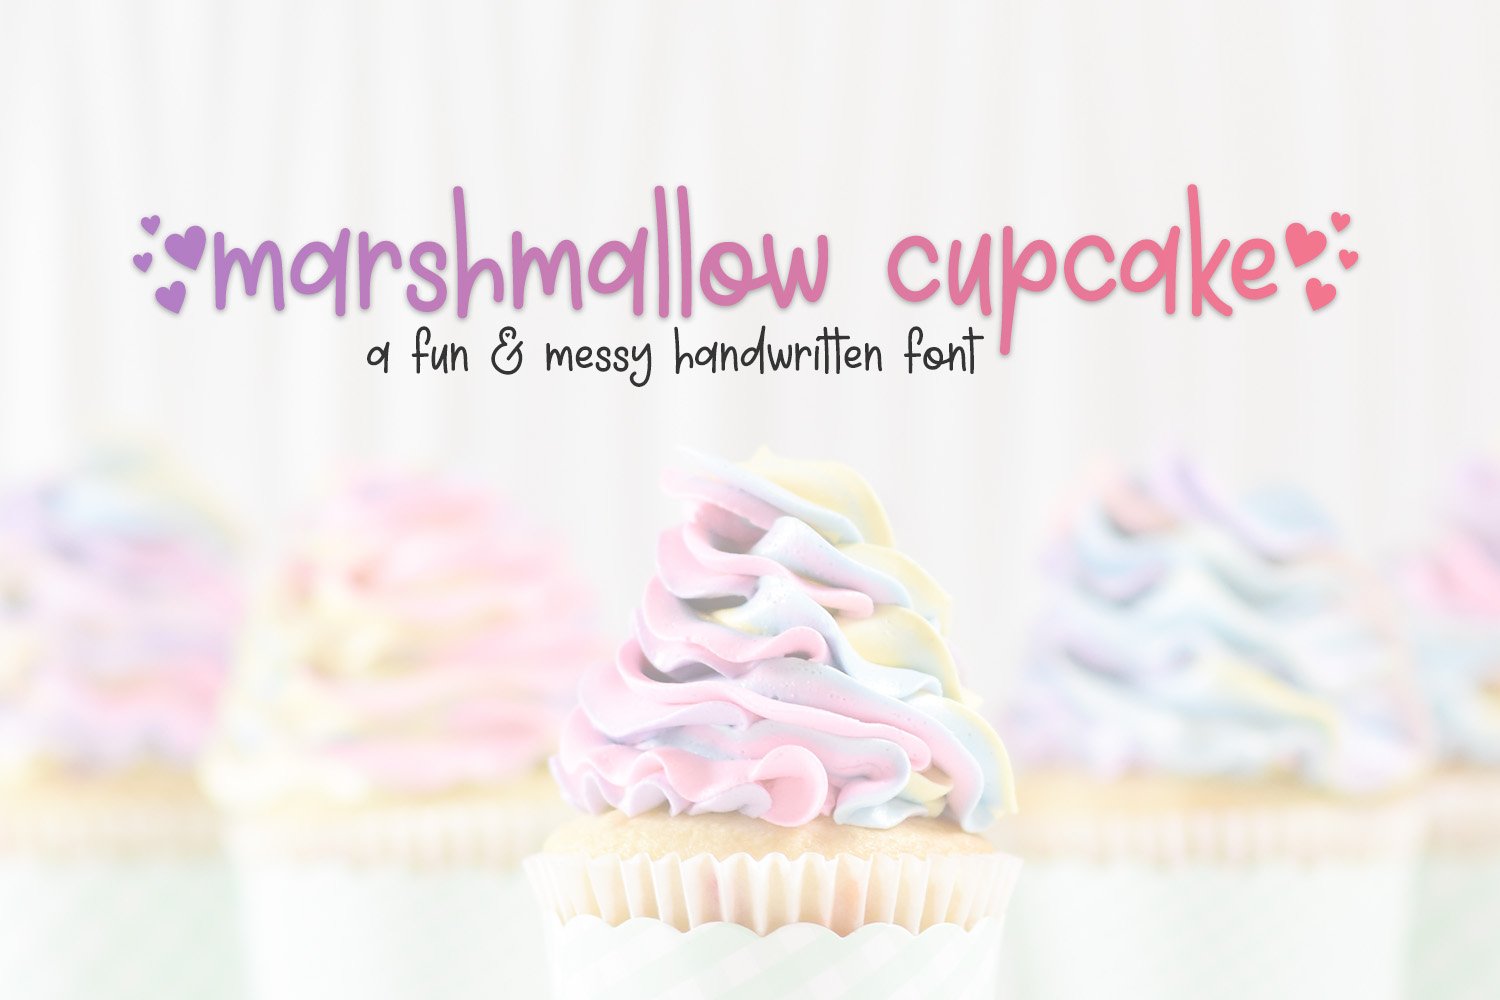 Marshmallow Cupcake cover image.